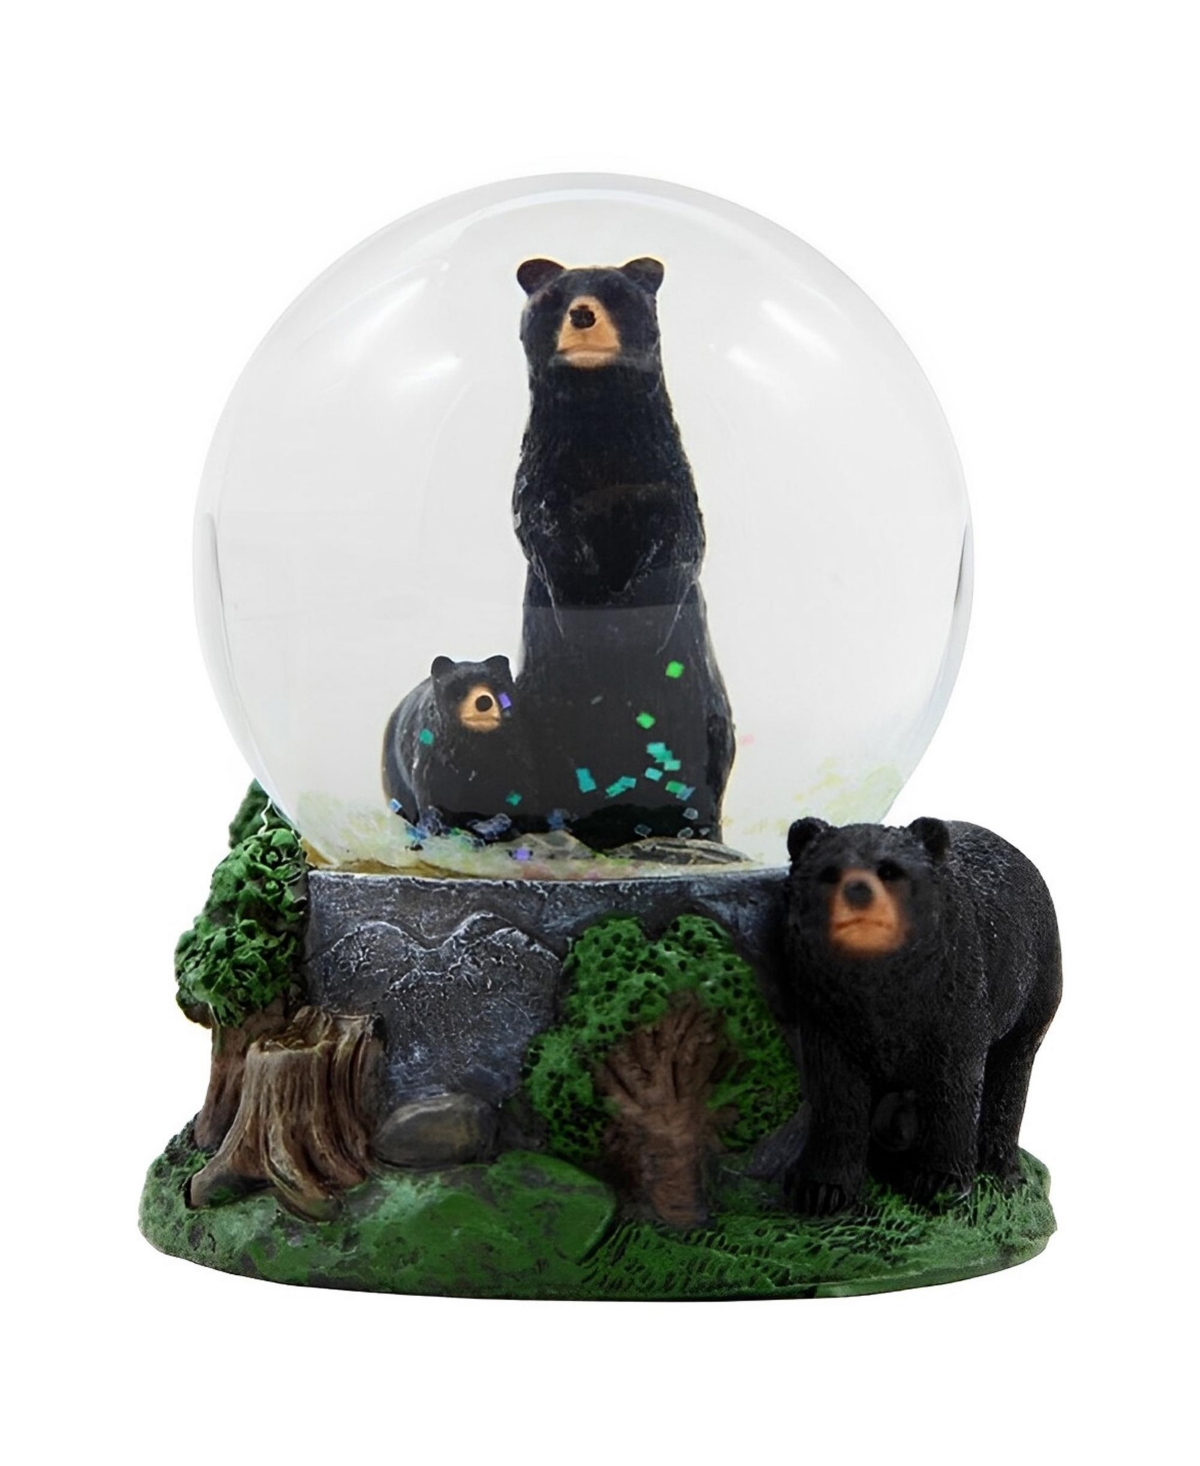 3.5"H Black Bear Glitter Snow Globe Figurine Home Decor Perfect Gift for House Warming, Holidays and Birthdays - Multicolor